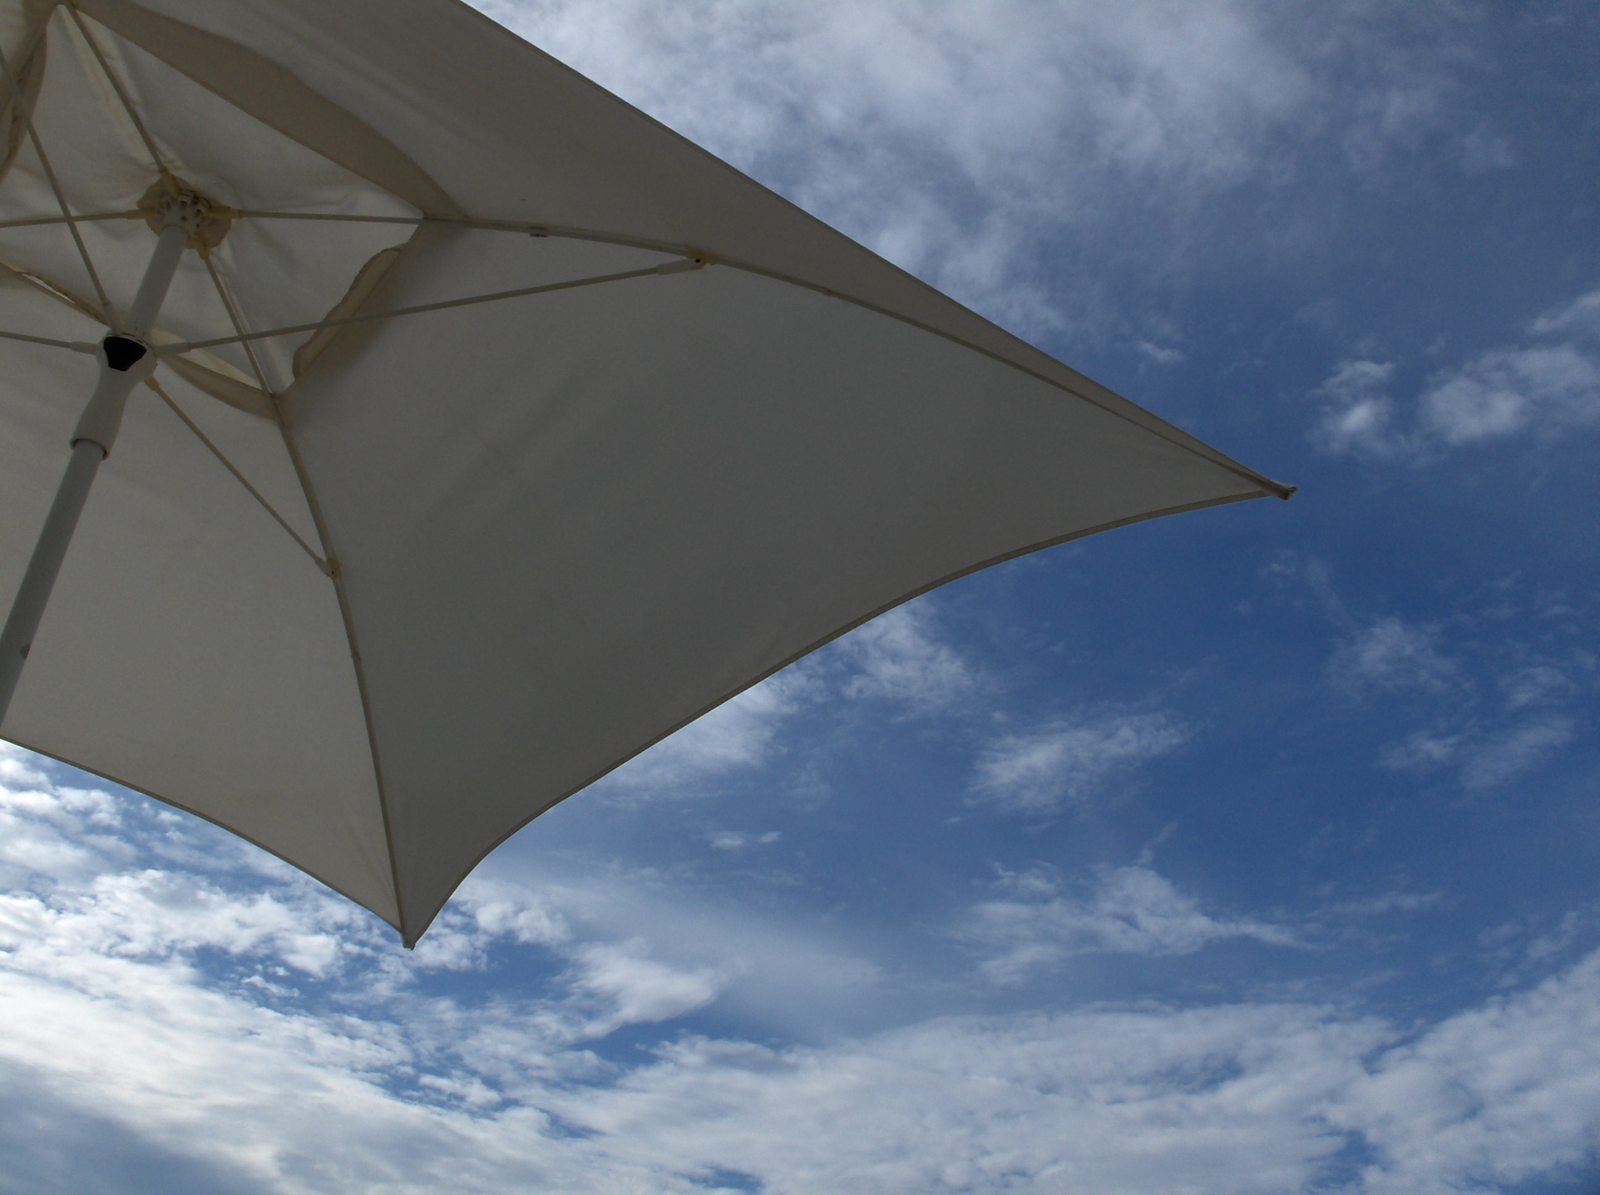 an umbrella up against the blue sky and white clouds